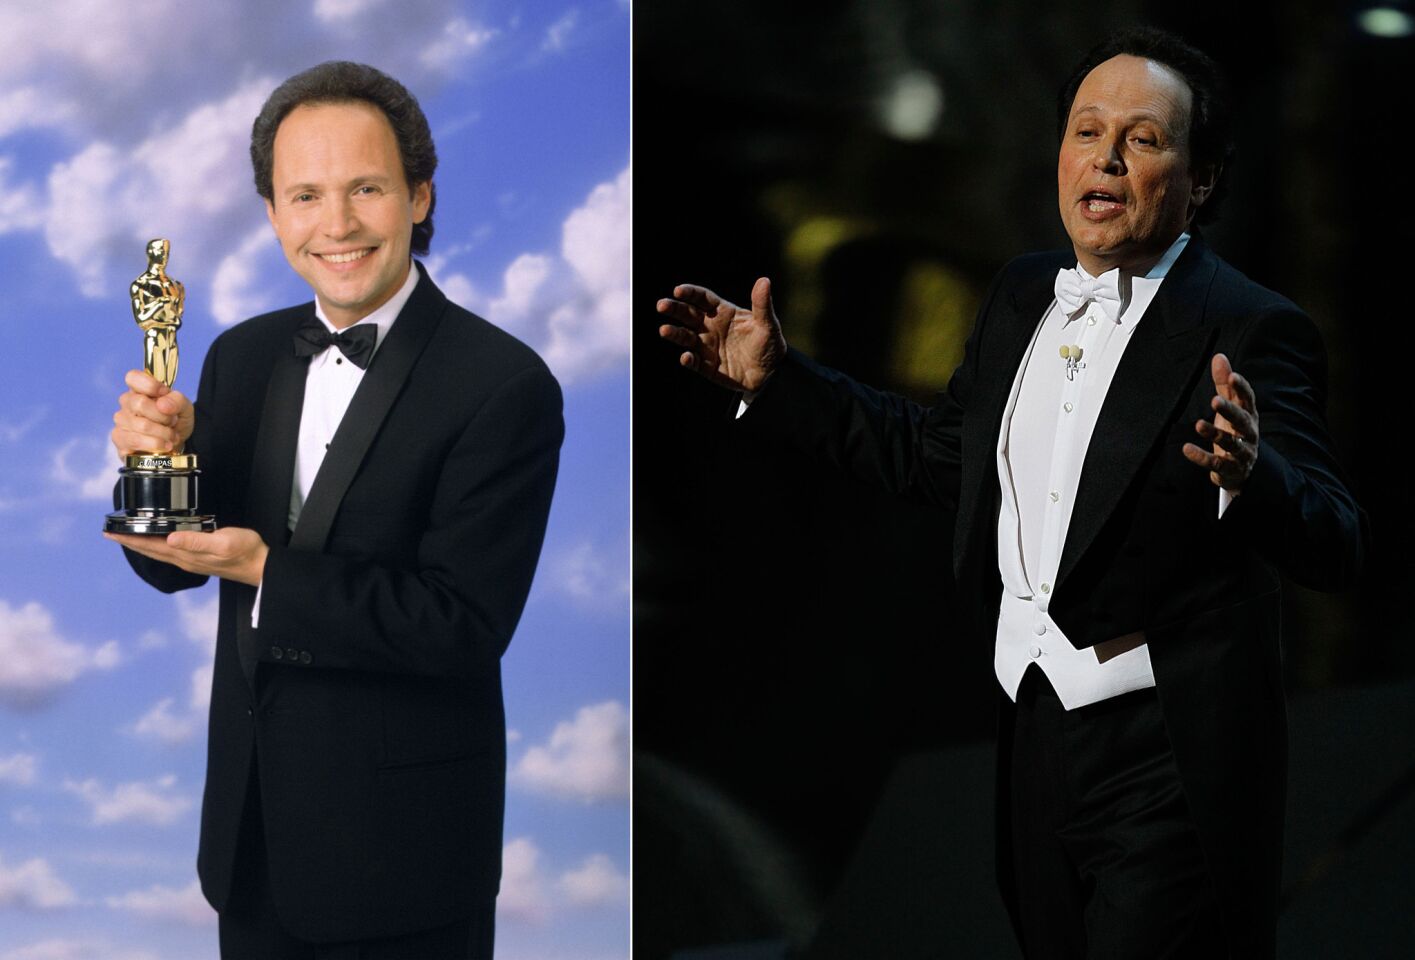 Considered one of the best of the contemporary comedic hosts, Crystal began his Oscar run with the 62nd telecast in 1990 and remained on the job through 1993. Also add 1997, 1998, 2000 (above left), 2004 and most recently 2012 (above right) to the list.